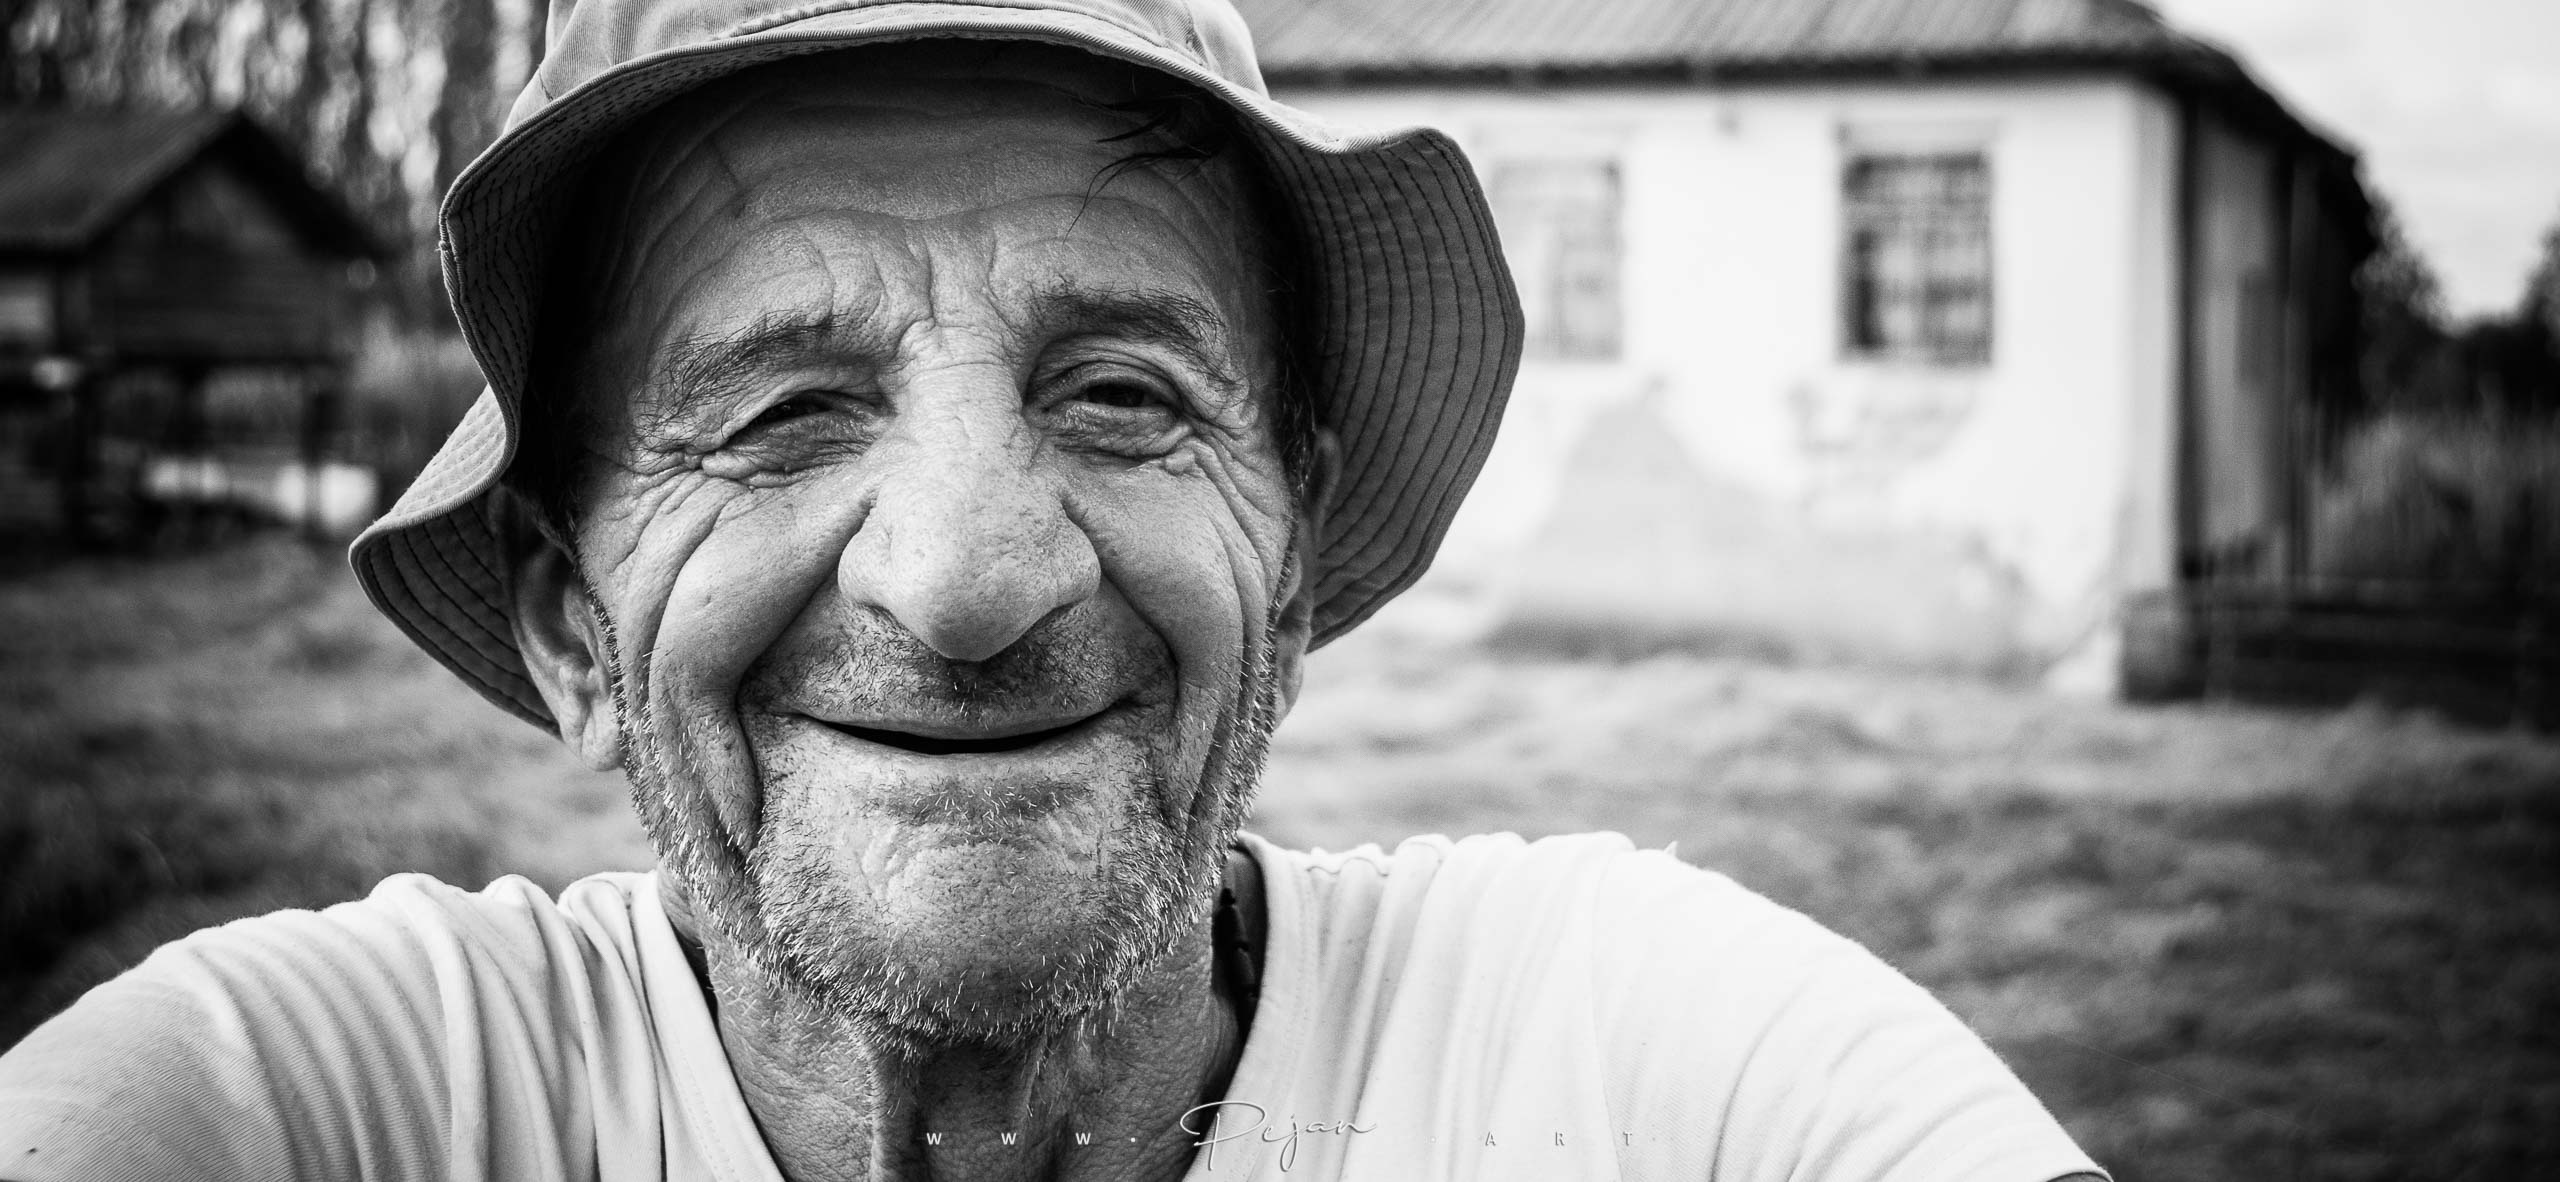 Monochrome portrait of a Georgian man with a jovial smile, joy and simplicity in the Georgian countryside, Caucasus